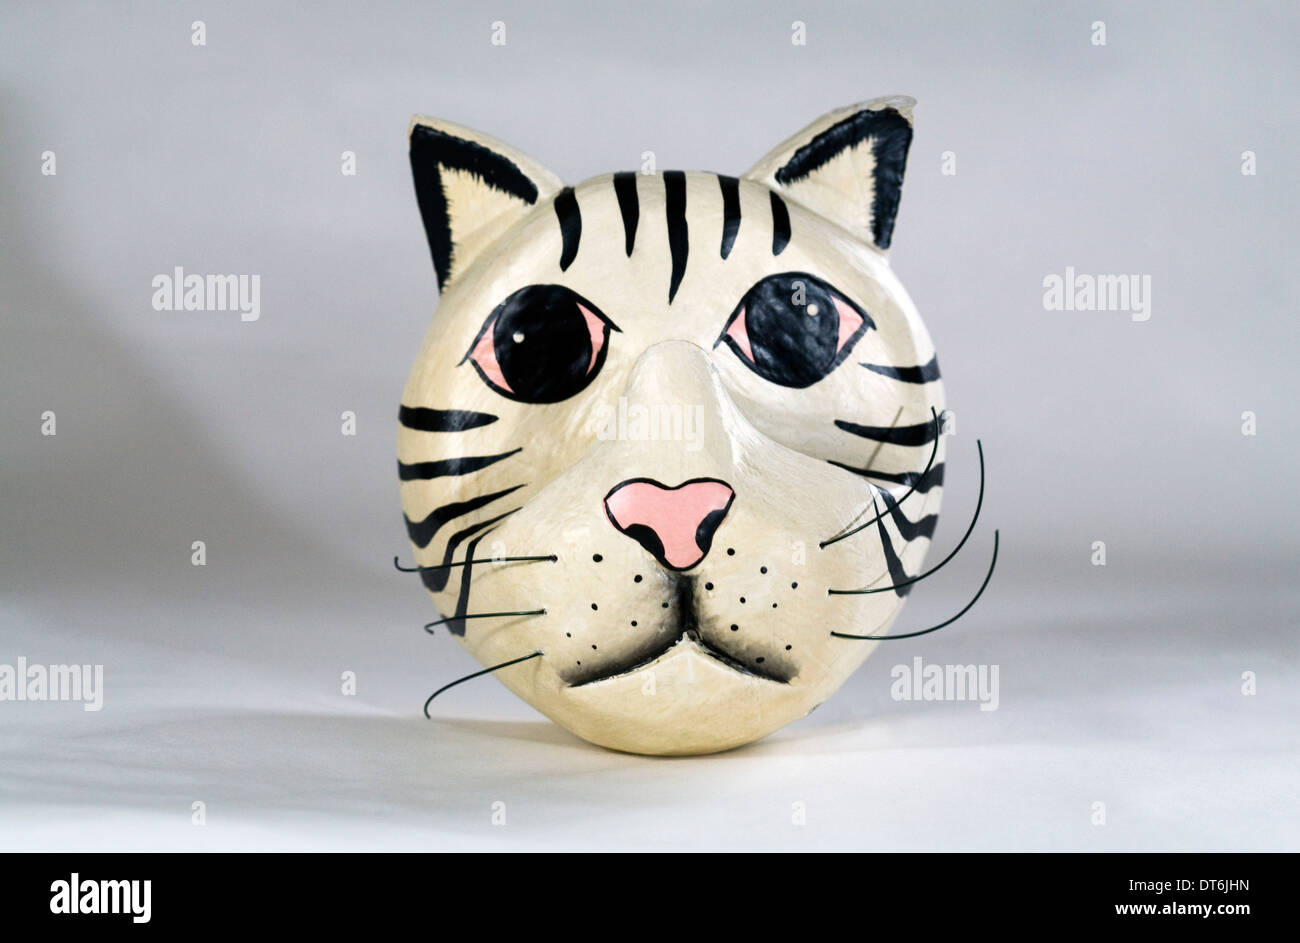 A funny wooden painted cat face or tiger face with whiskers. Stock Photo